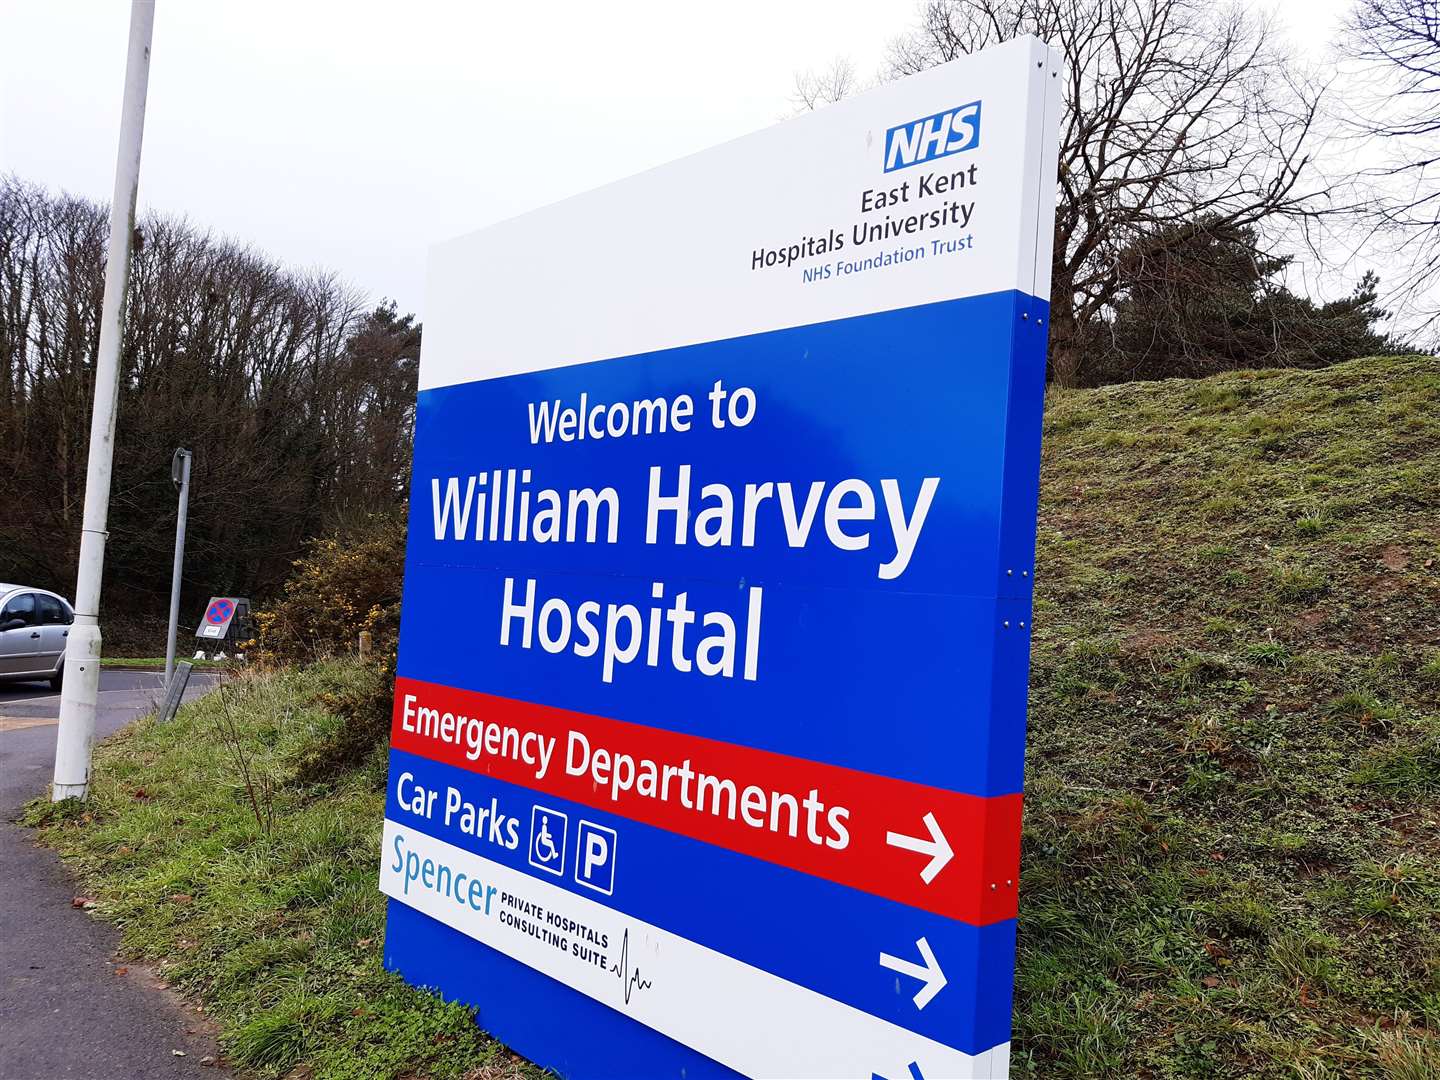 The CQC inspections at the William Harvey and QEQM were carried out unannounced in the summer